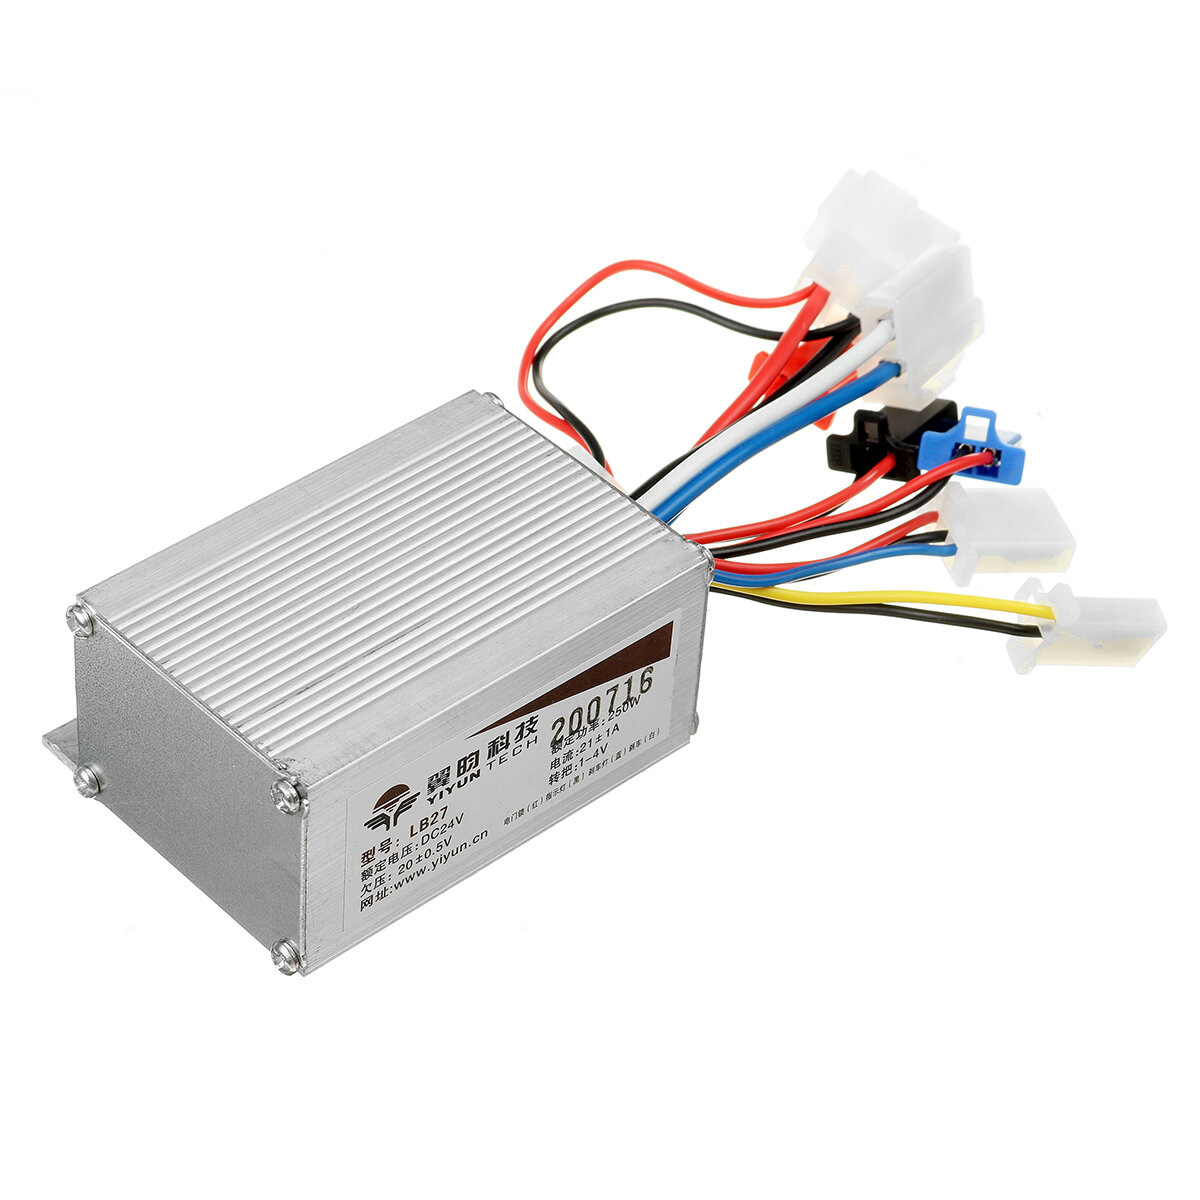 24V/36V/48V 250/350/500W Brushed Controller Box for Electric Bicycle Scooter